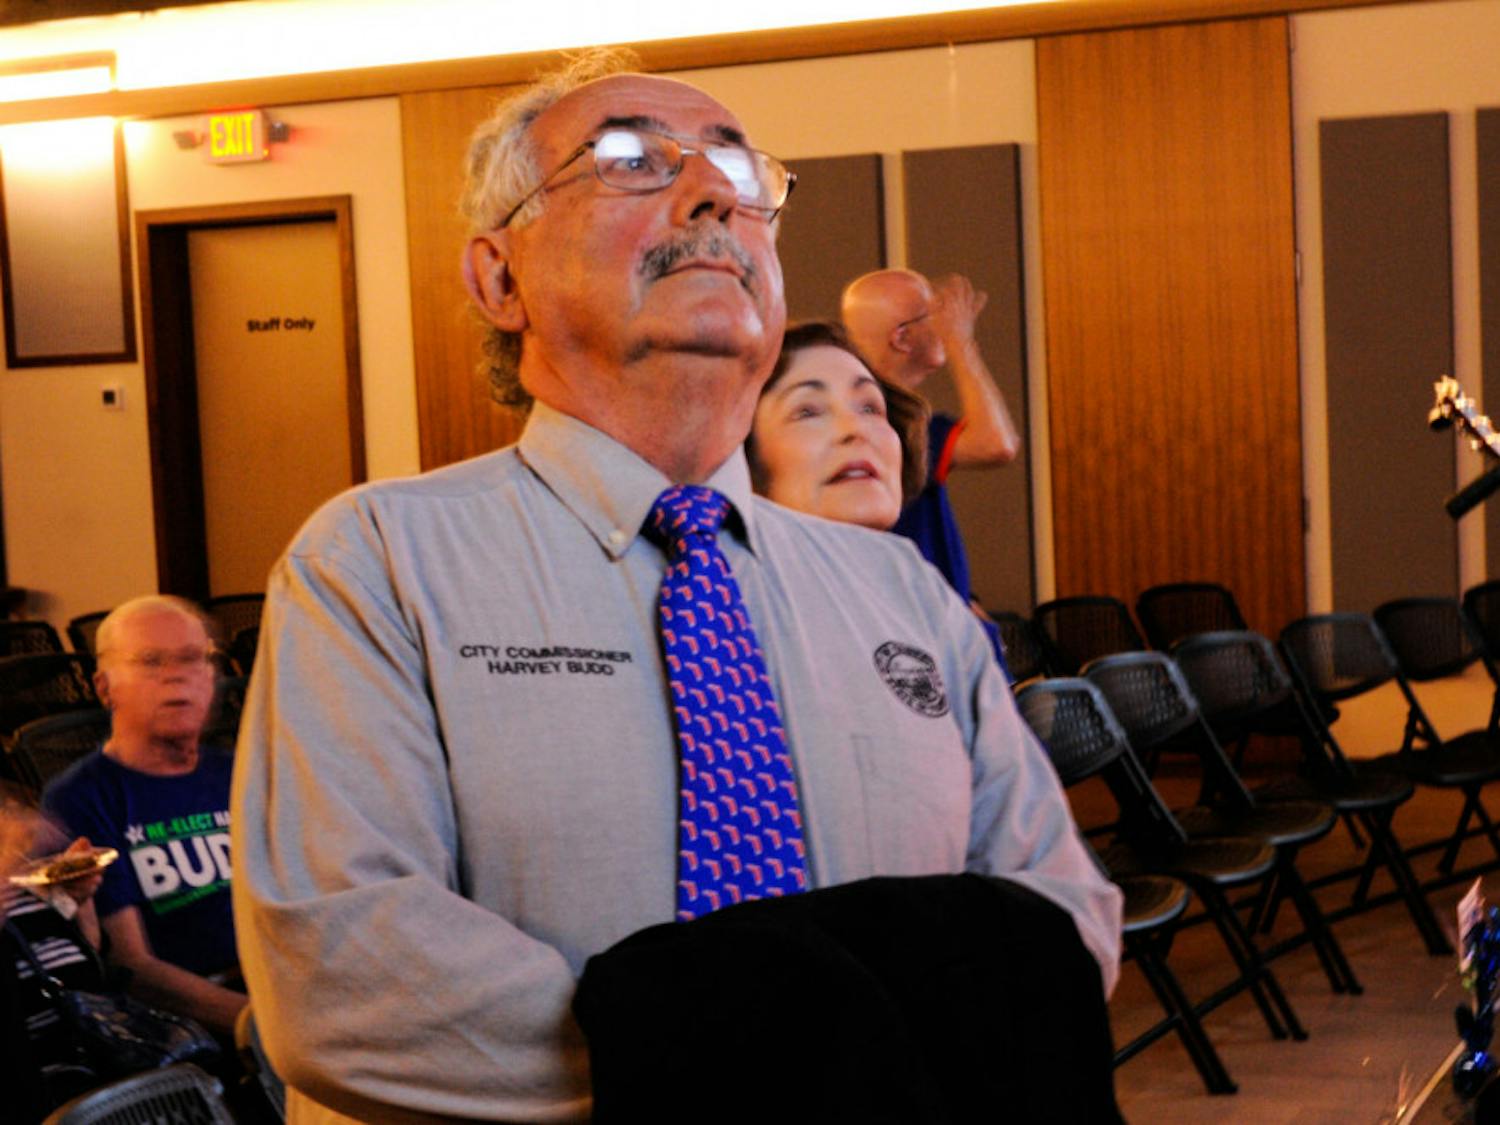 Harvey Budd and his wife Ilene Silverman-Budd watch the results of the City Commision election with fellow supporters.
&nbsp;